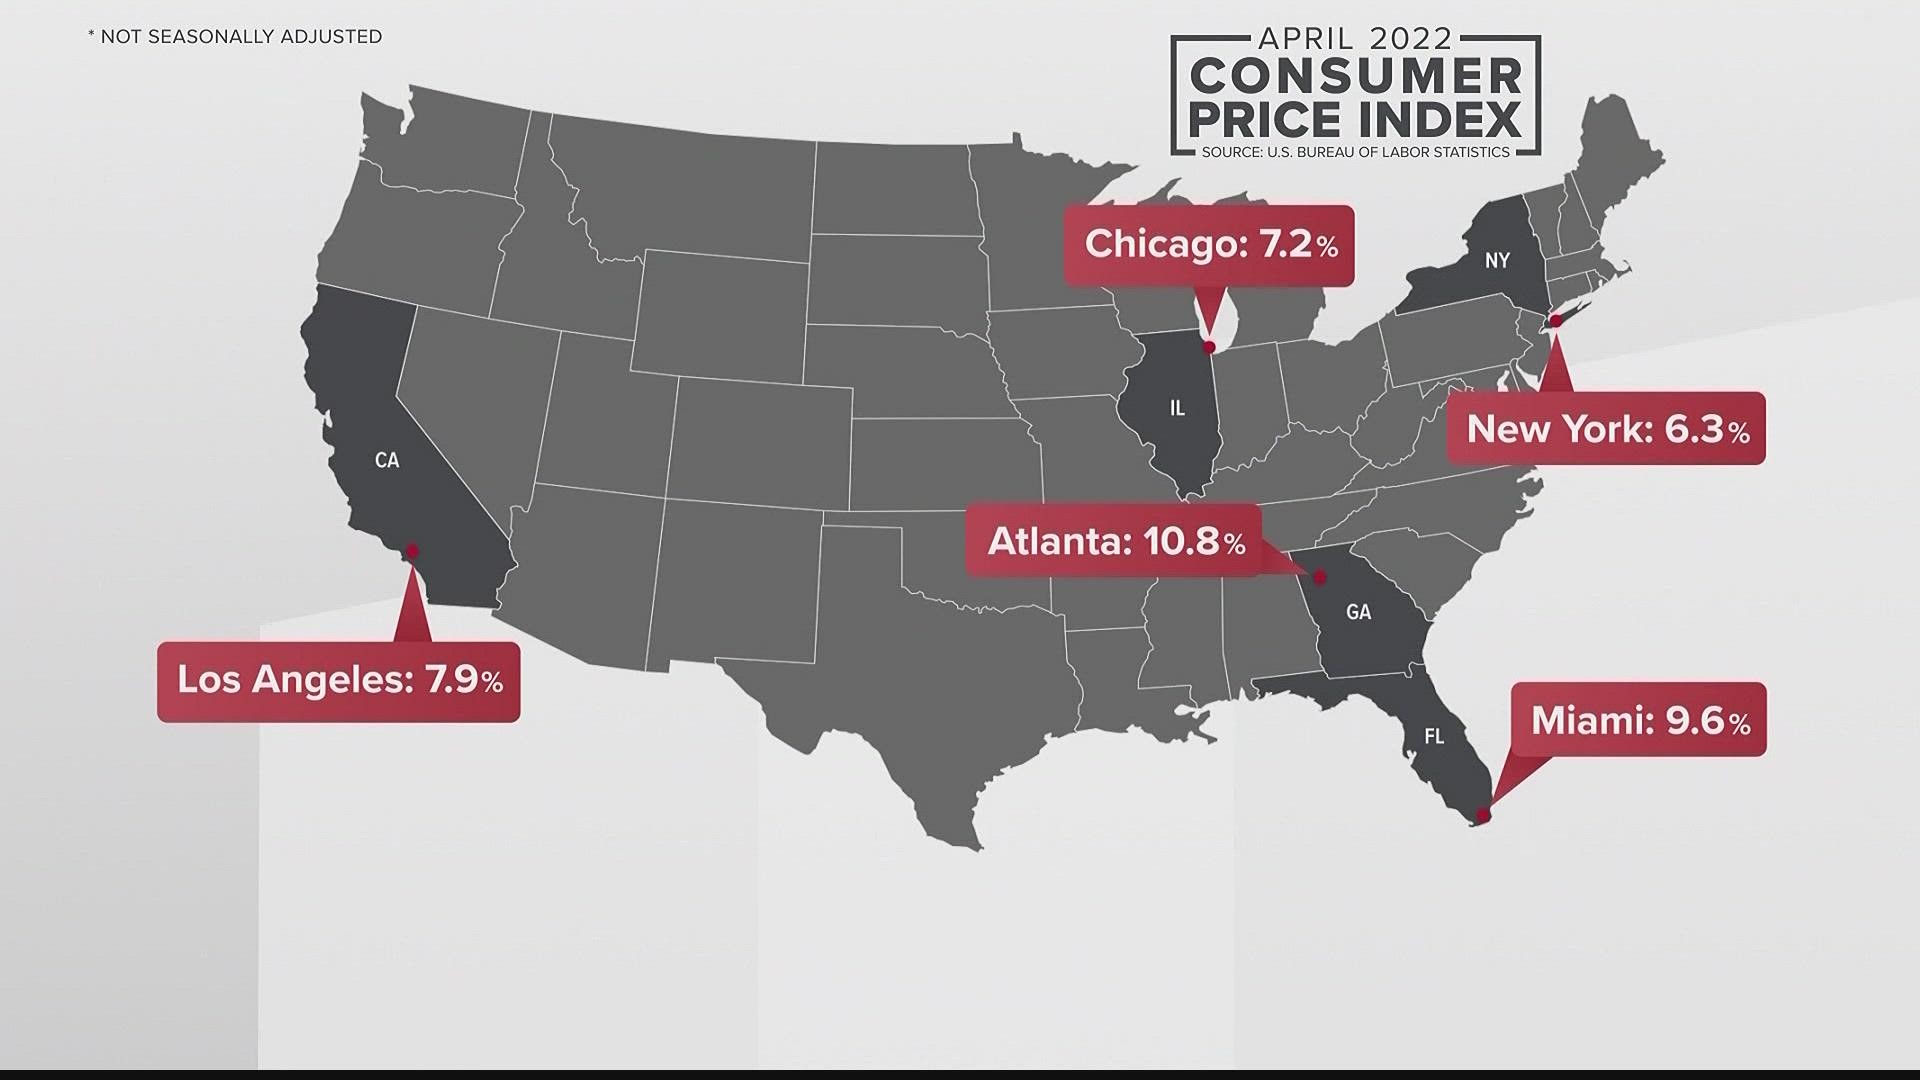 Metro Atlanta's inflation rate is now one of the highest in the country according to new federal data released this morning.